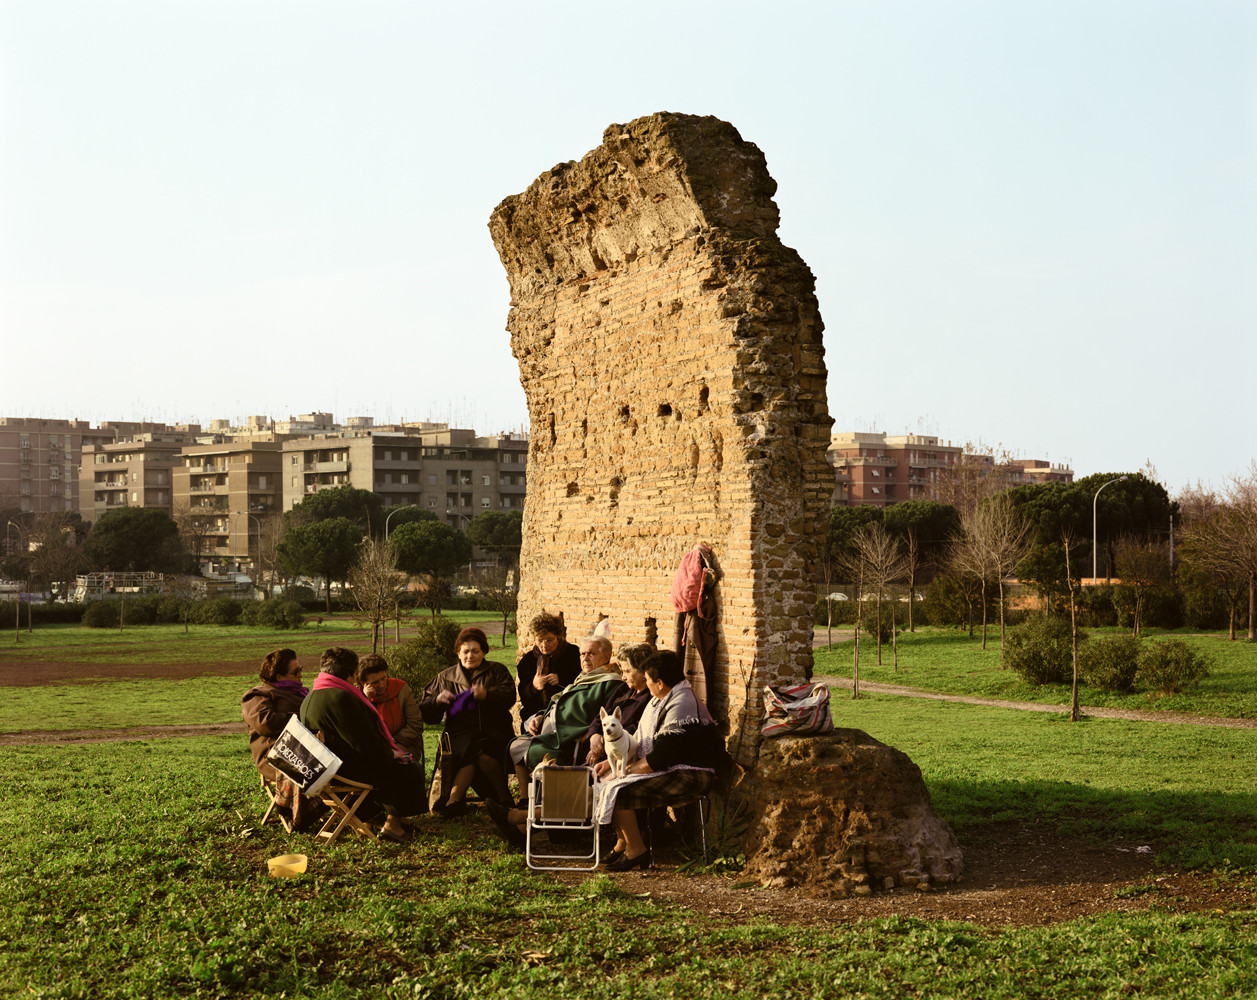 Joel Sternfeld, ‘Women at a daily gathering beside an ancient Roman wall, Parco dei Gordiani, Rome, October’, 1990